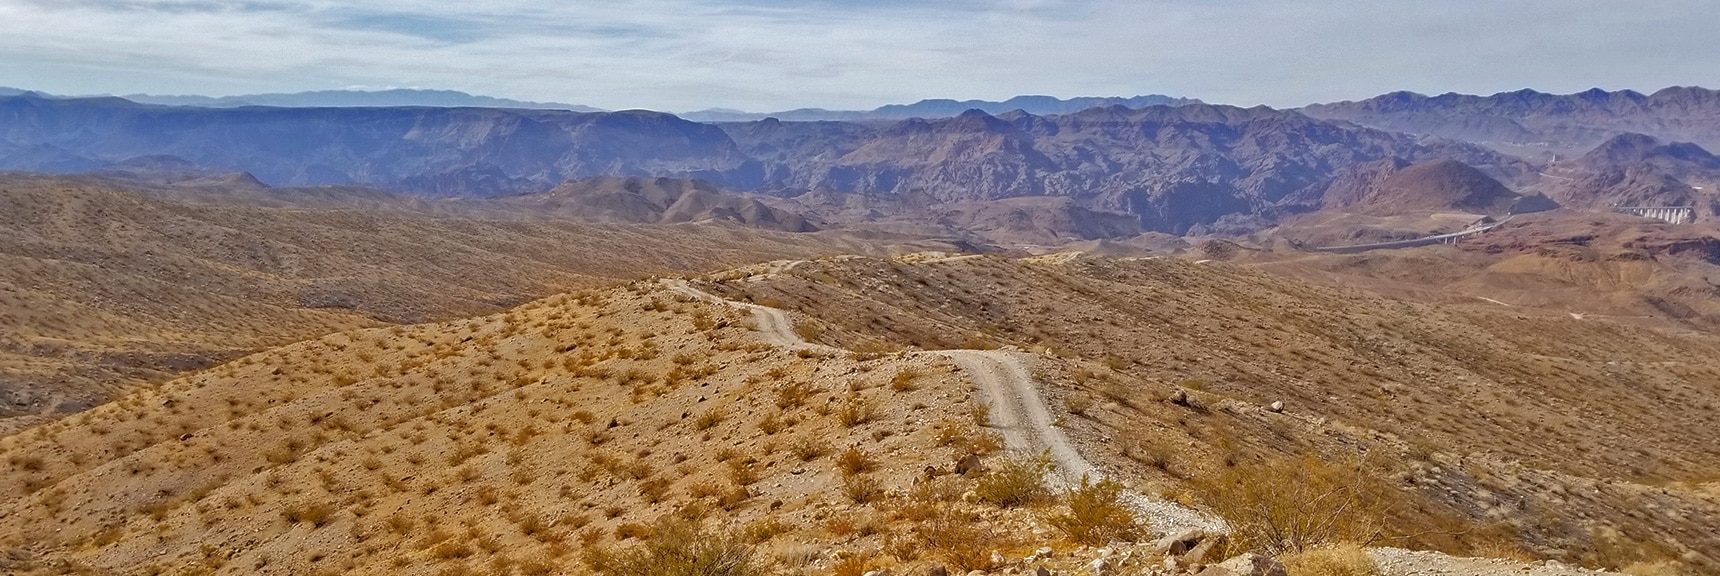 View Down South Mine Access Road from High Point Intersection with North Mine Access Road | Kingman Wash Access Road | Lake Mead National Recreation Area, Arizona